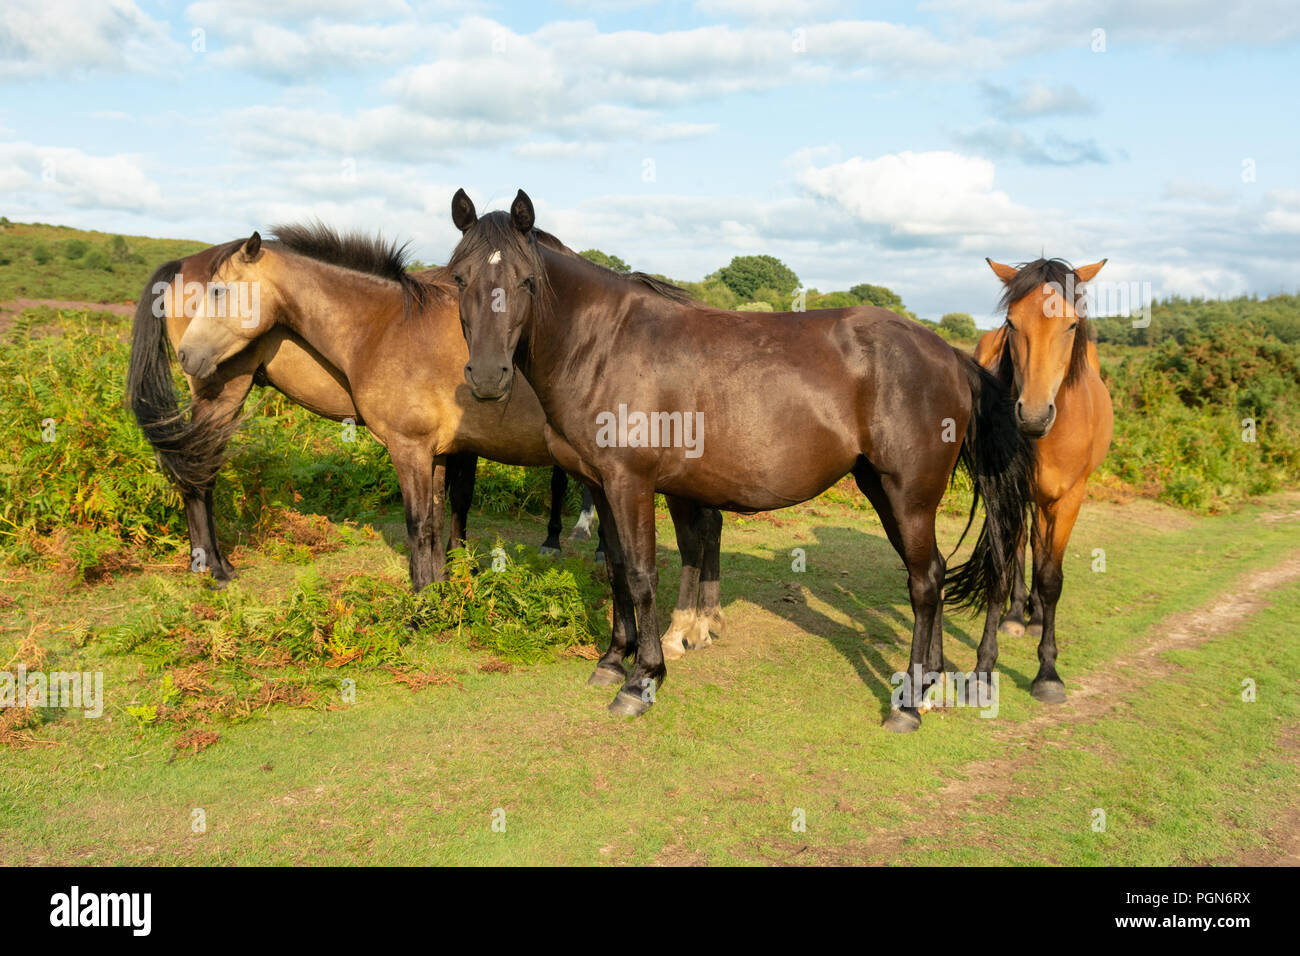 Group of 4 New Forest ponies standing together on a late summer day, Hampshire, England, UK Stock Photo